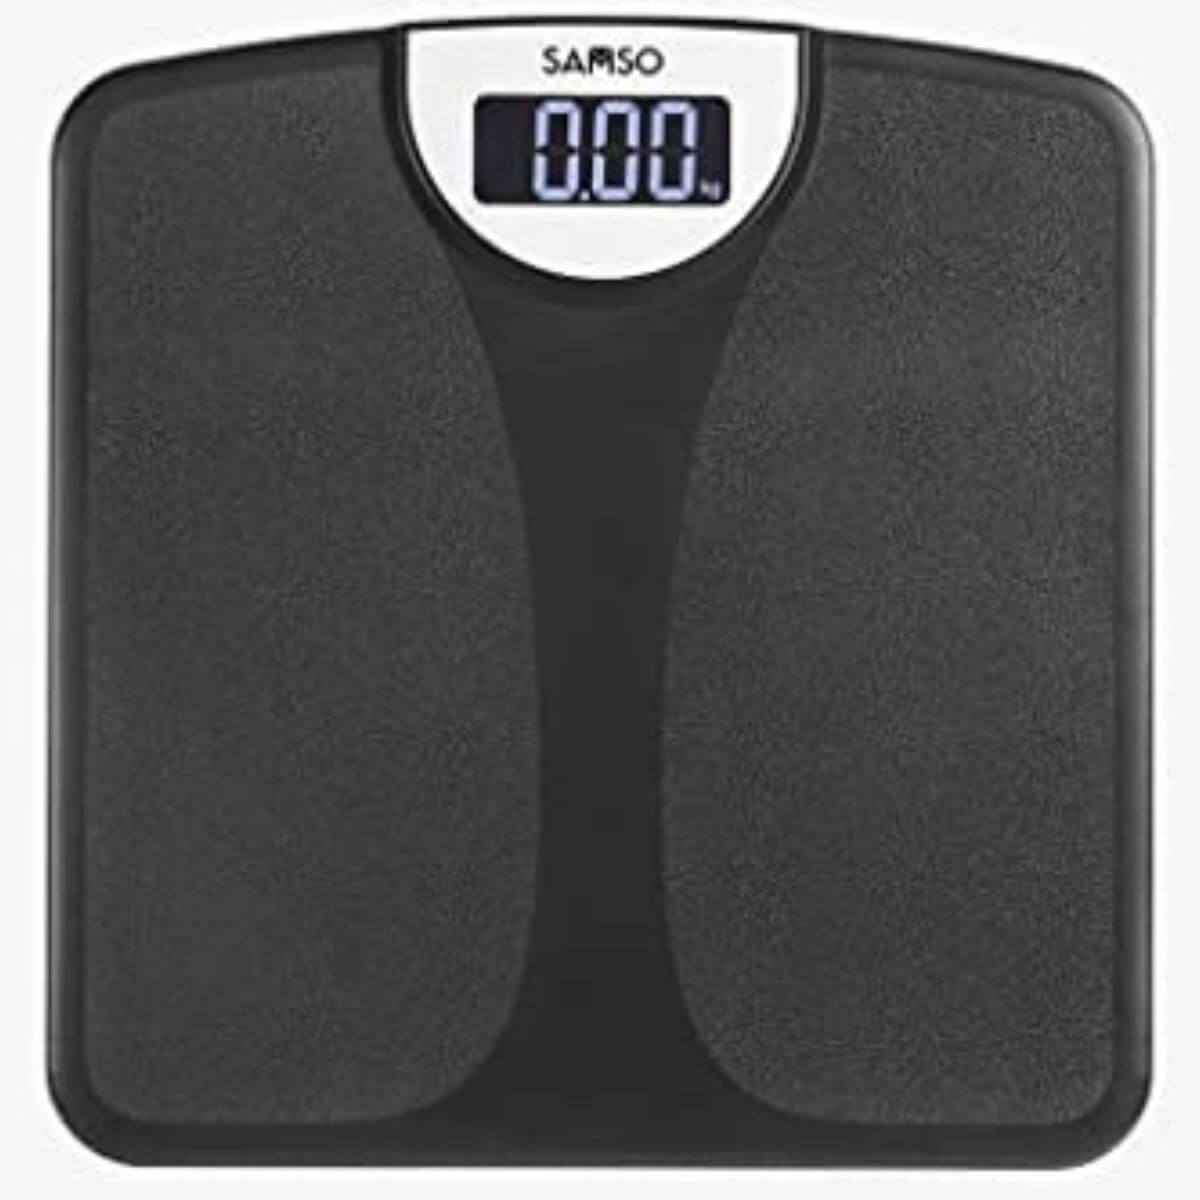 Samso Power Digital Human Weighing Scale – Sports Wing | Shop on